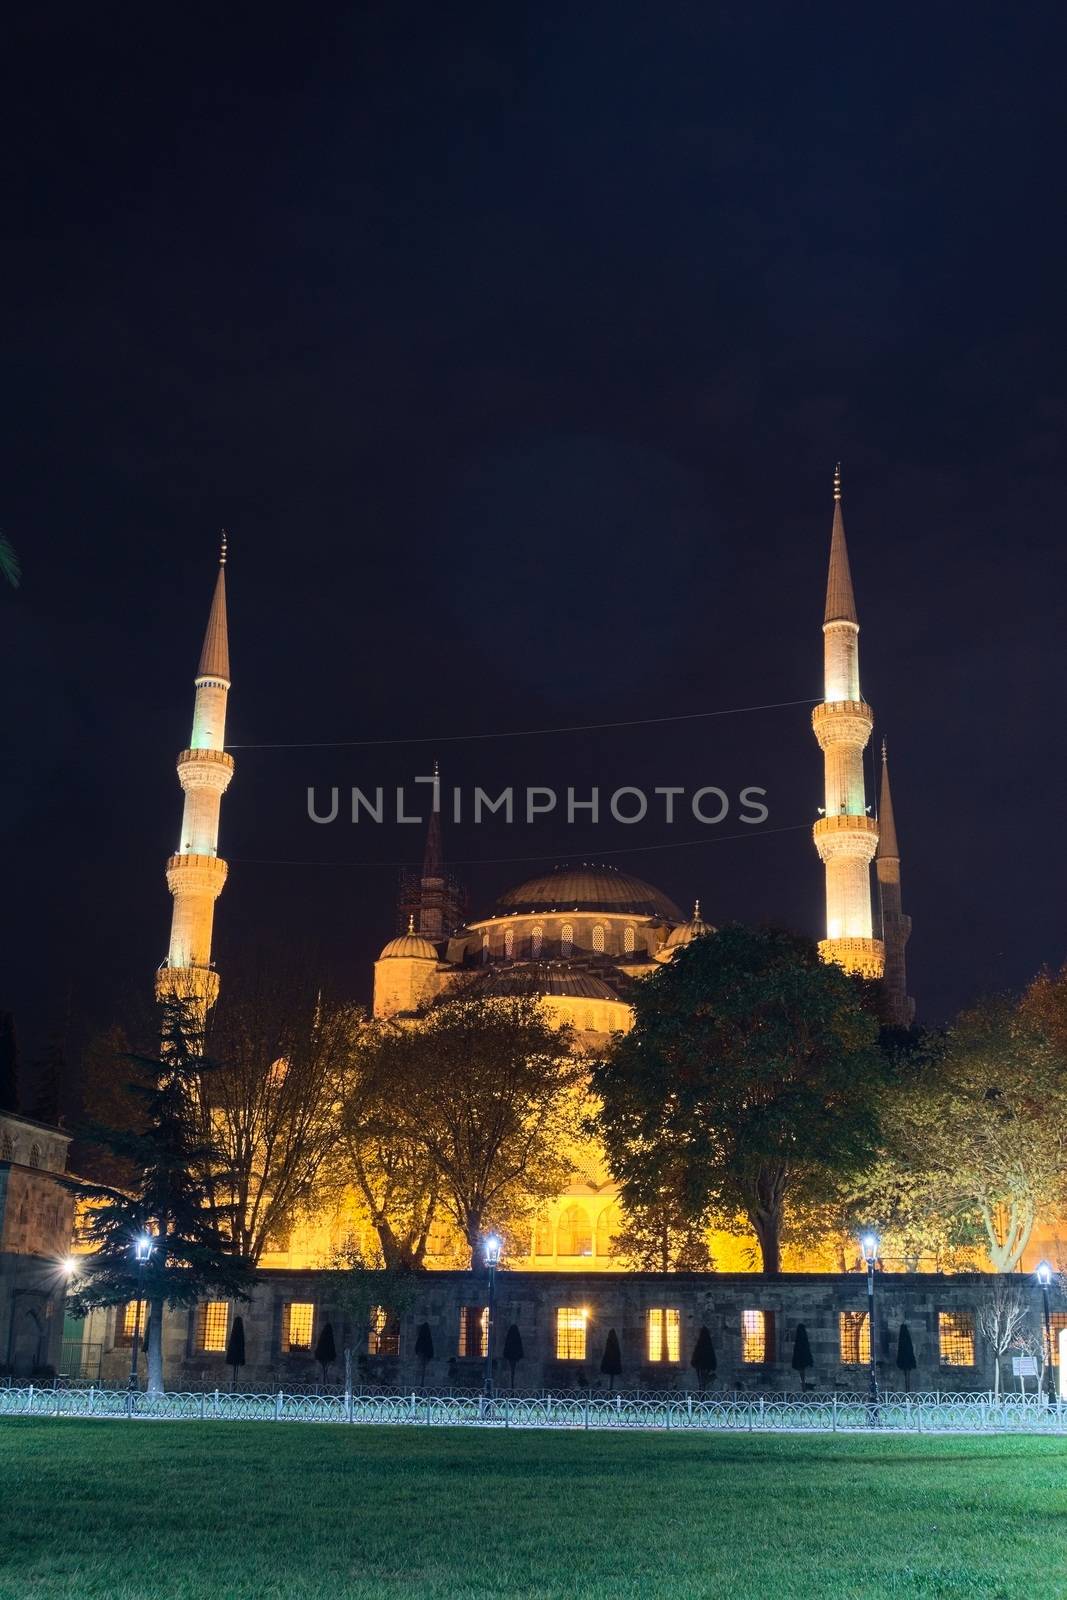 Hagia Sophia at night. This was a Greek Orthodox Christian cathedral, later an Ottoman imperial mosque and a museum in the present day. by hernan_hyper